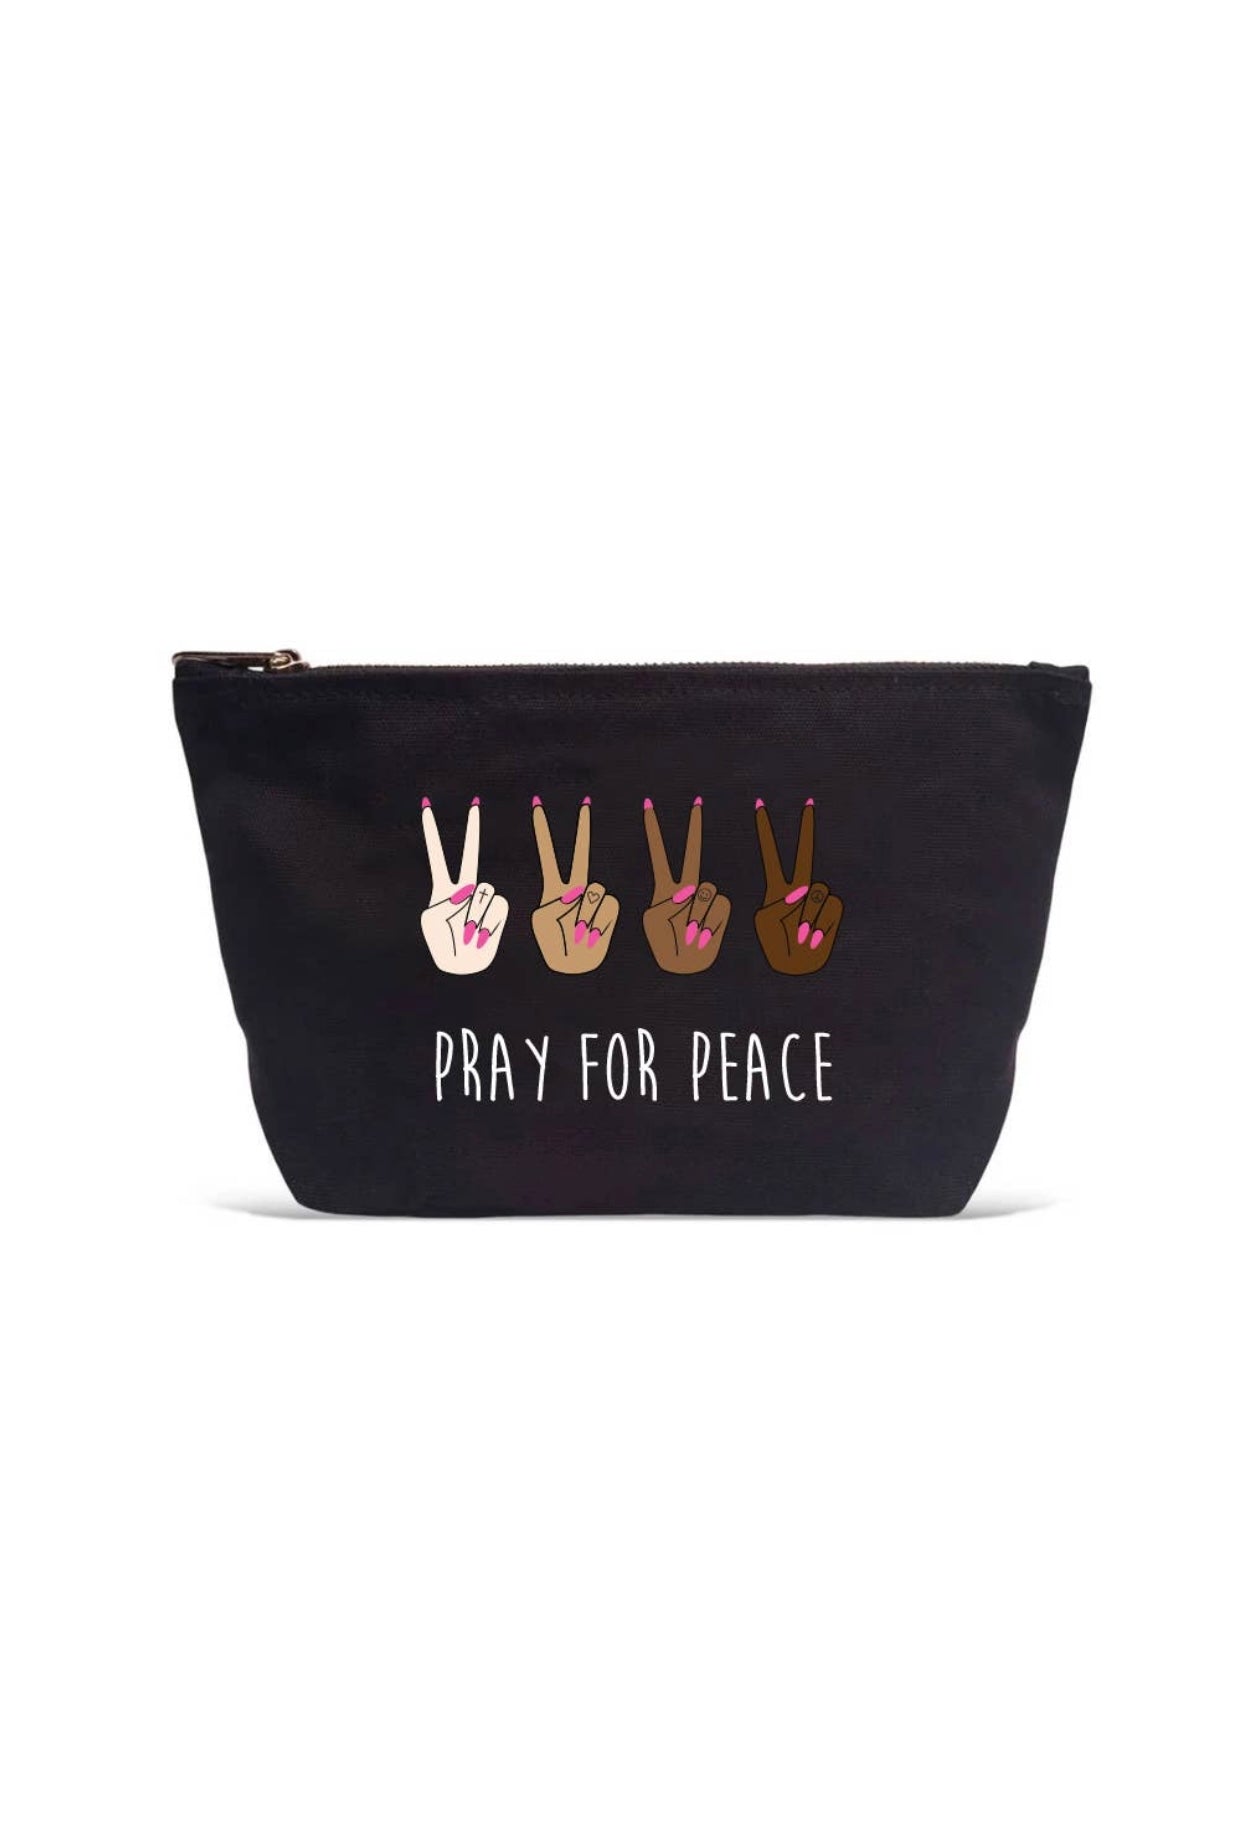 Pray for Peace Pouch